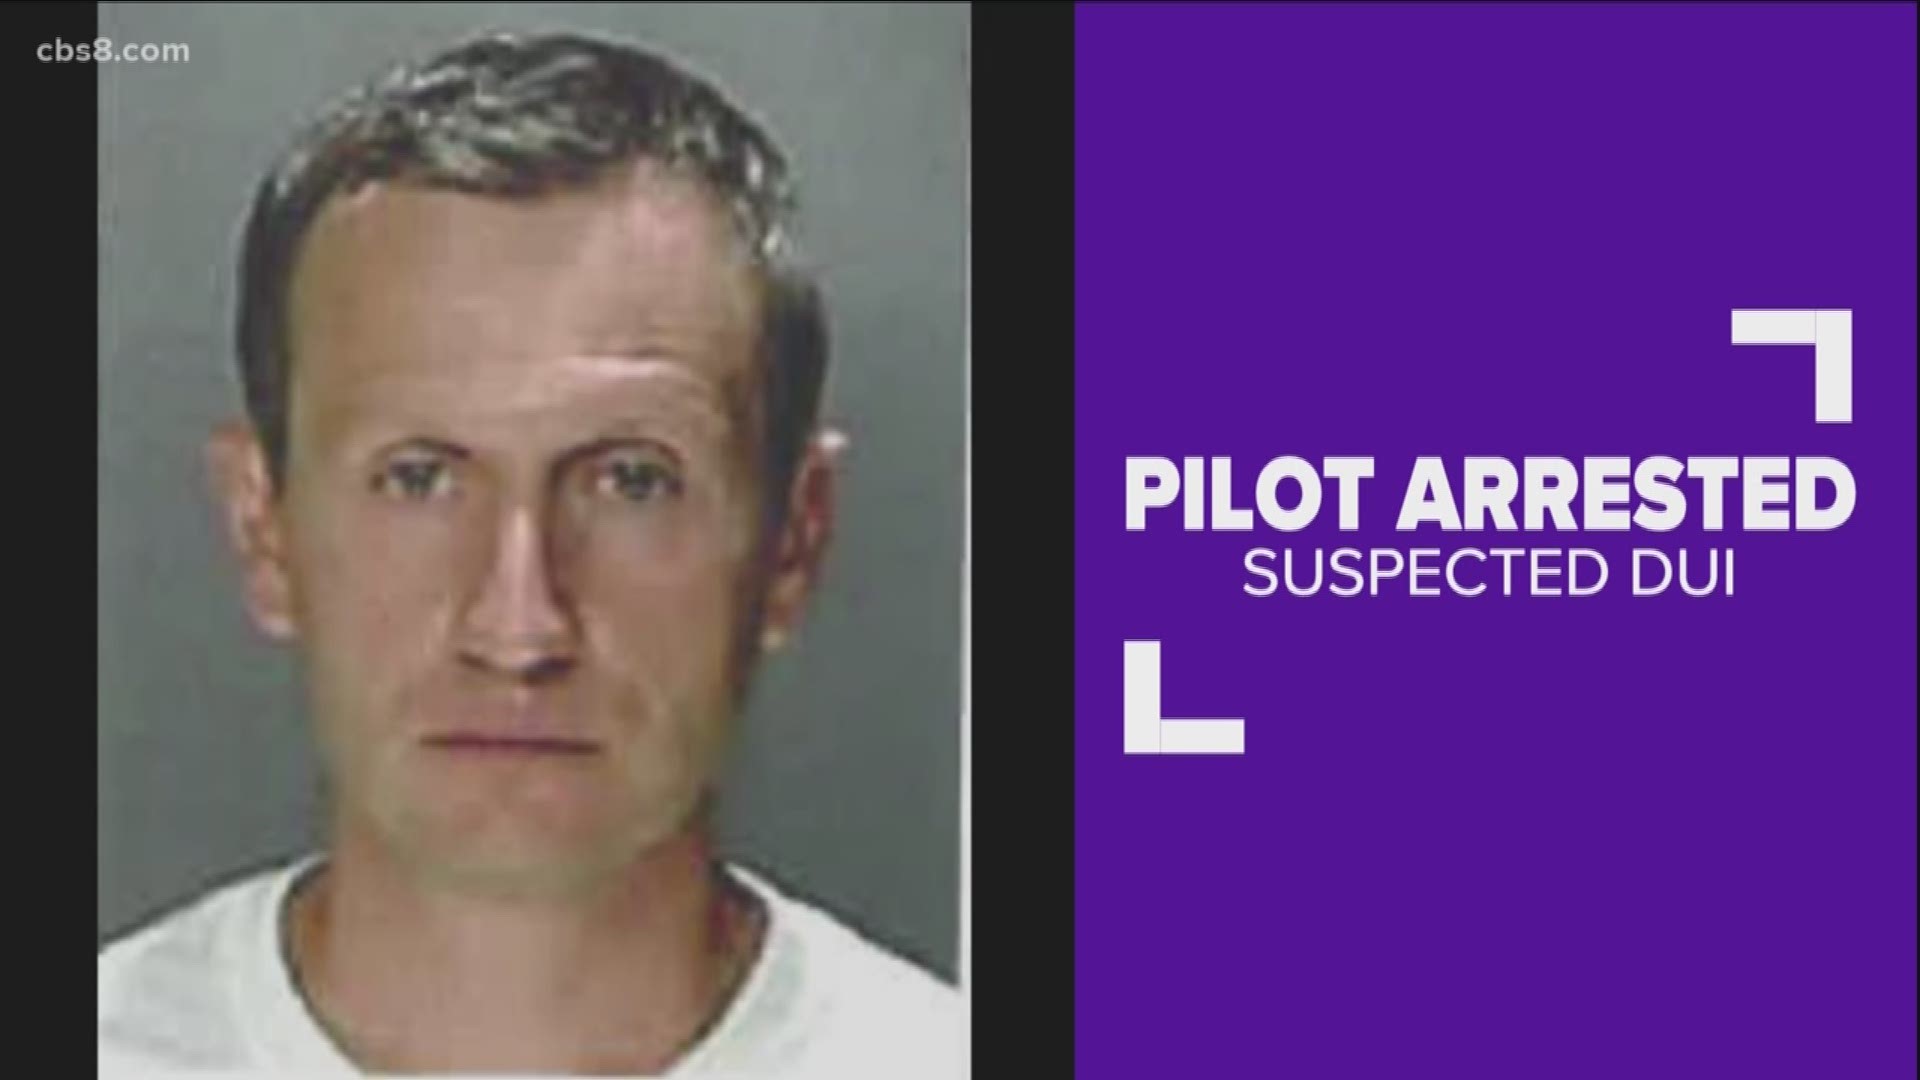 A Delta pilot was arrested Tuesday at Minneapolis-St. Paul International Airport after failing a sobriety test. Transportation Security Administration (TSA) officers at a security checkpoint noticed the smell of alcohol on the pilot and called airport police who administered the test.